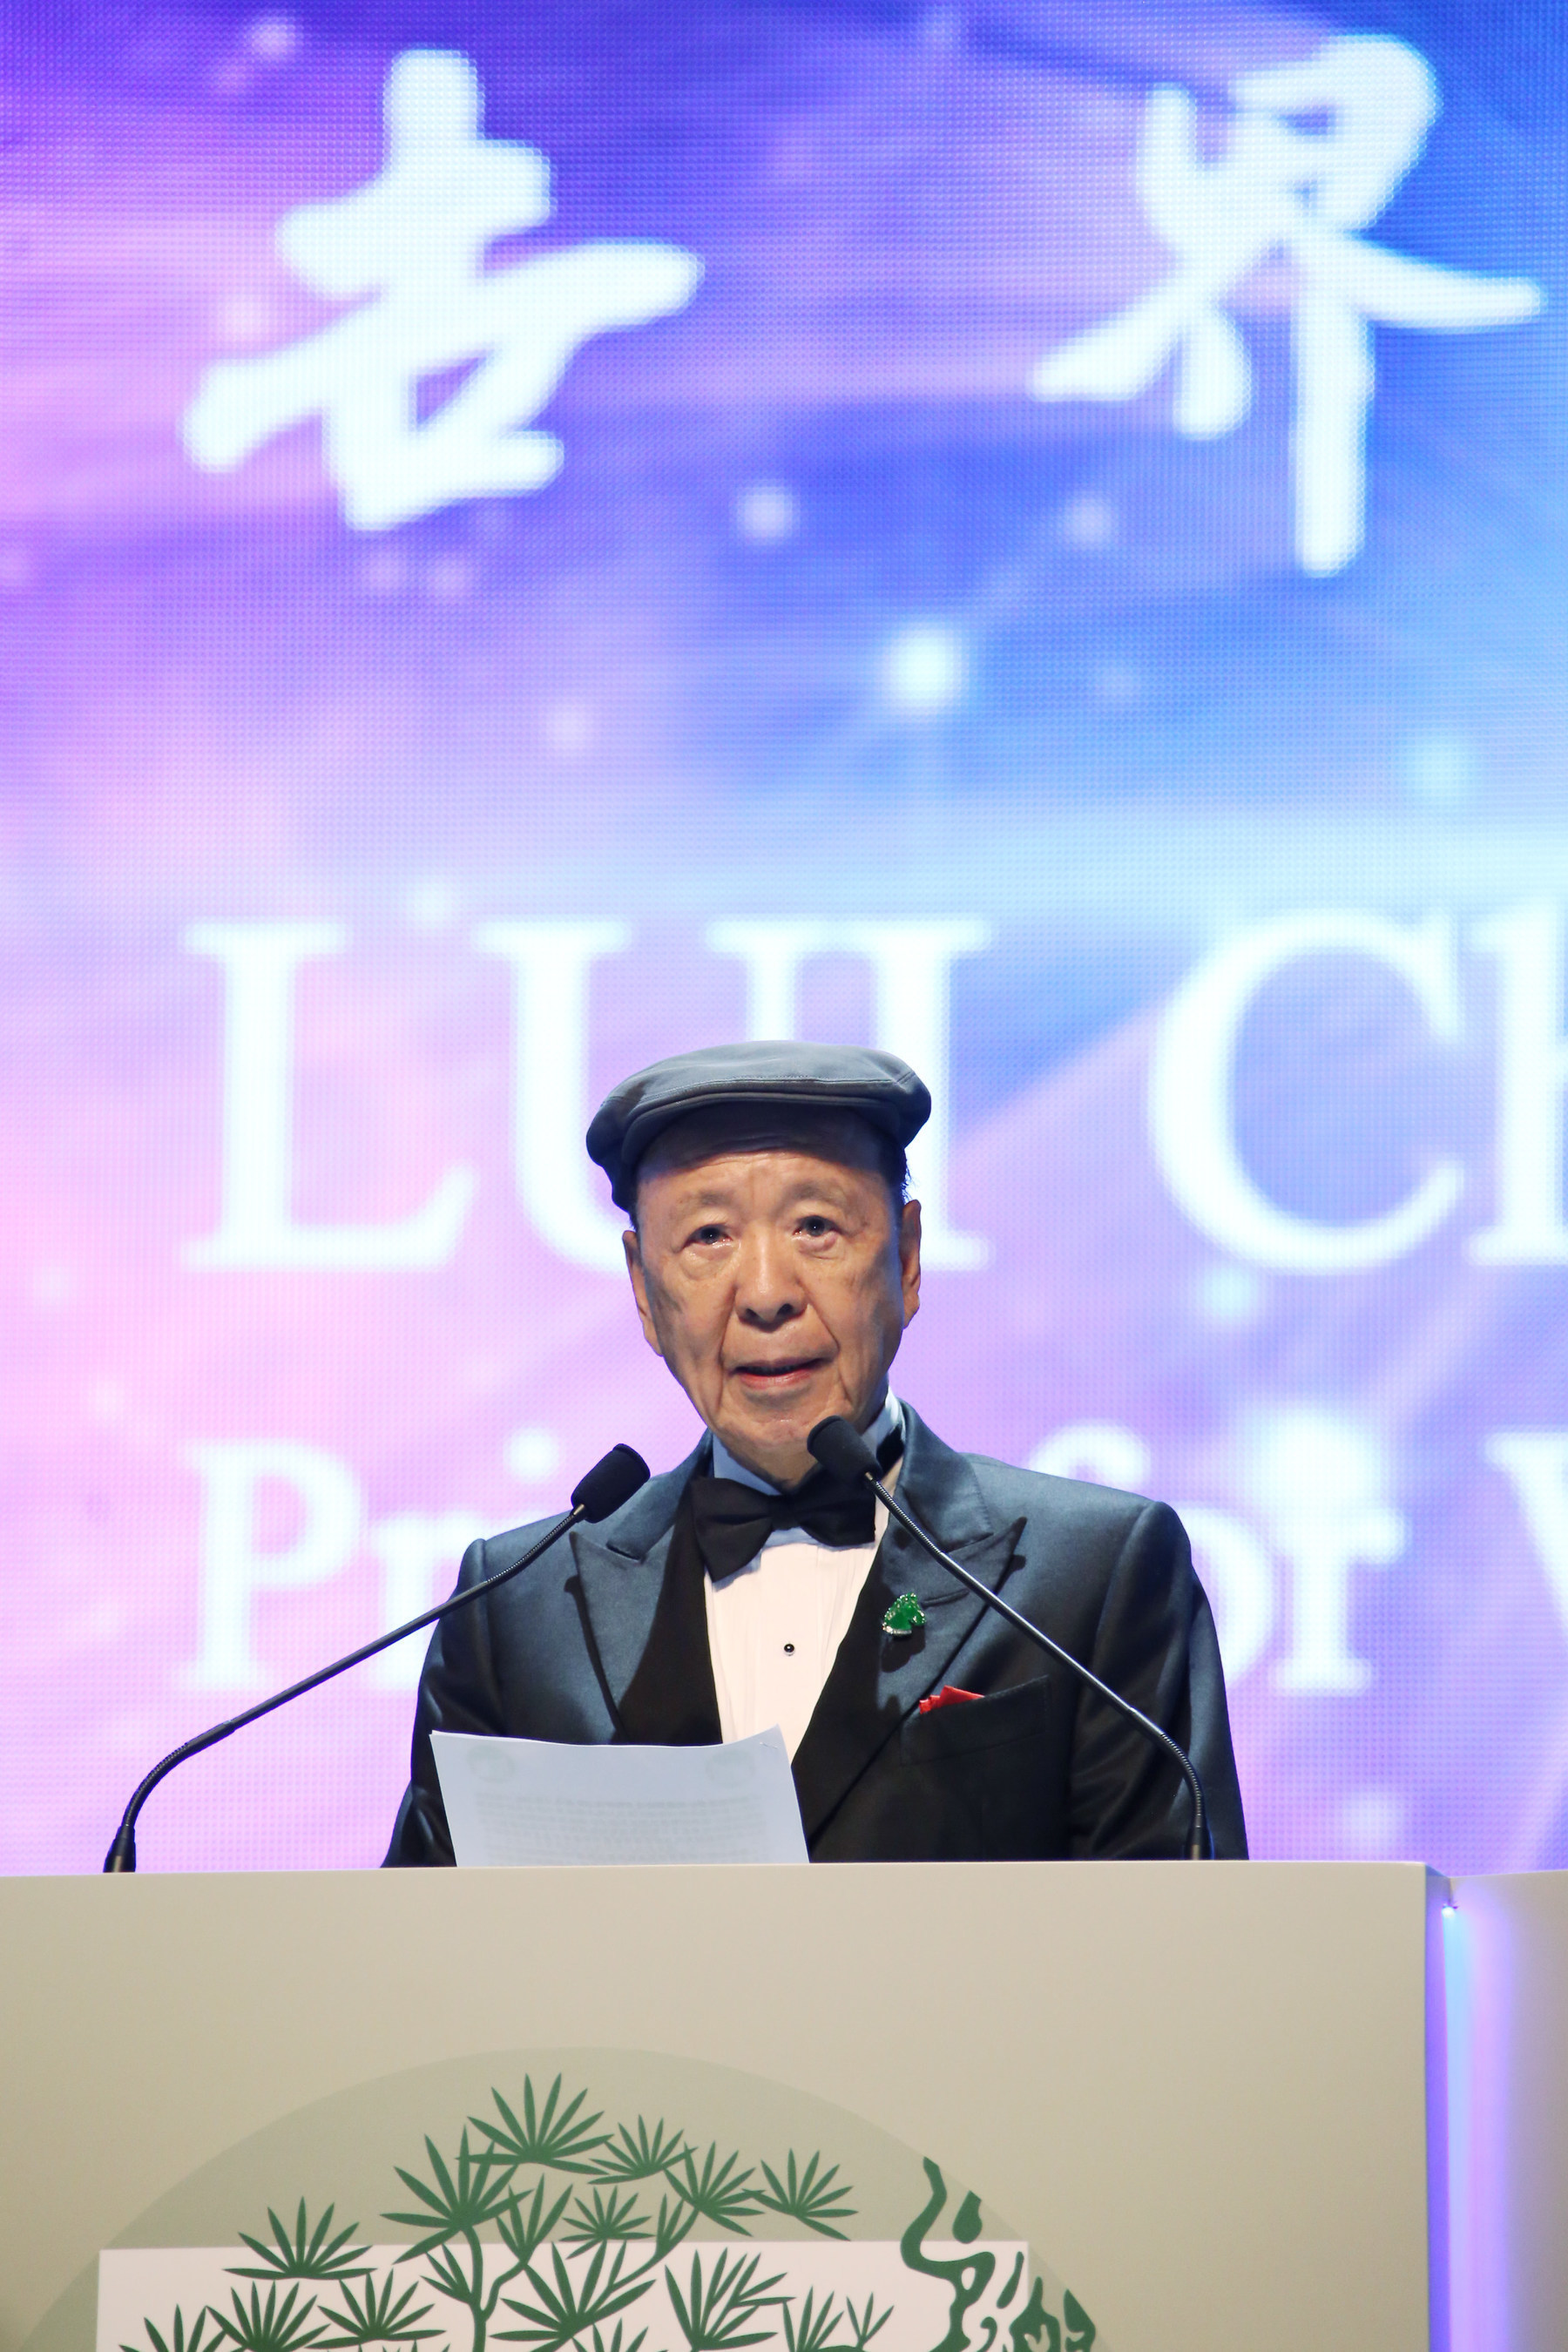 Dr. Lui Che Woo, Founder, LUI Che Woo Prize – Prize for World Civilisation.